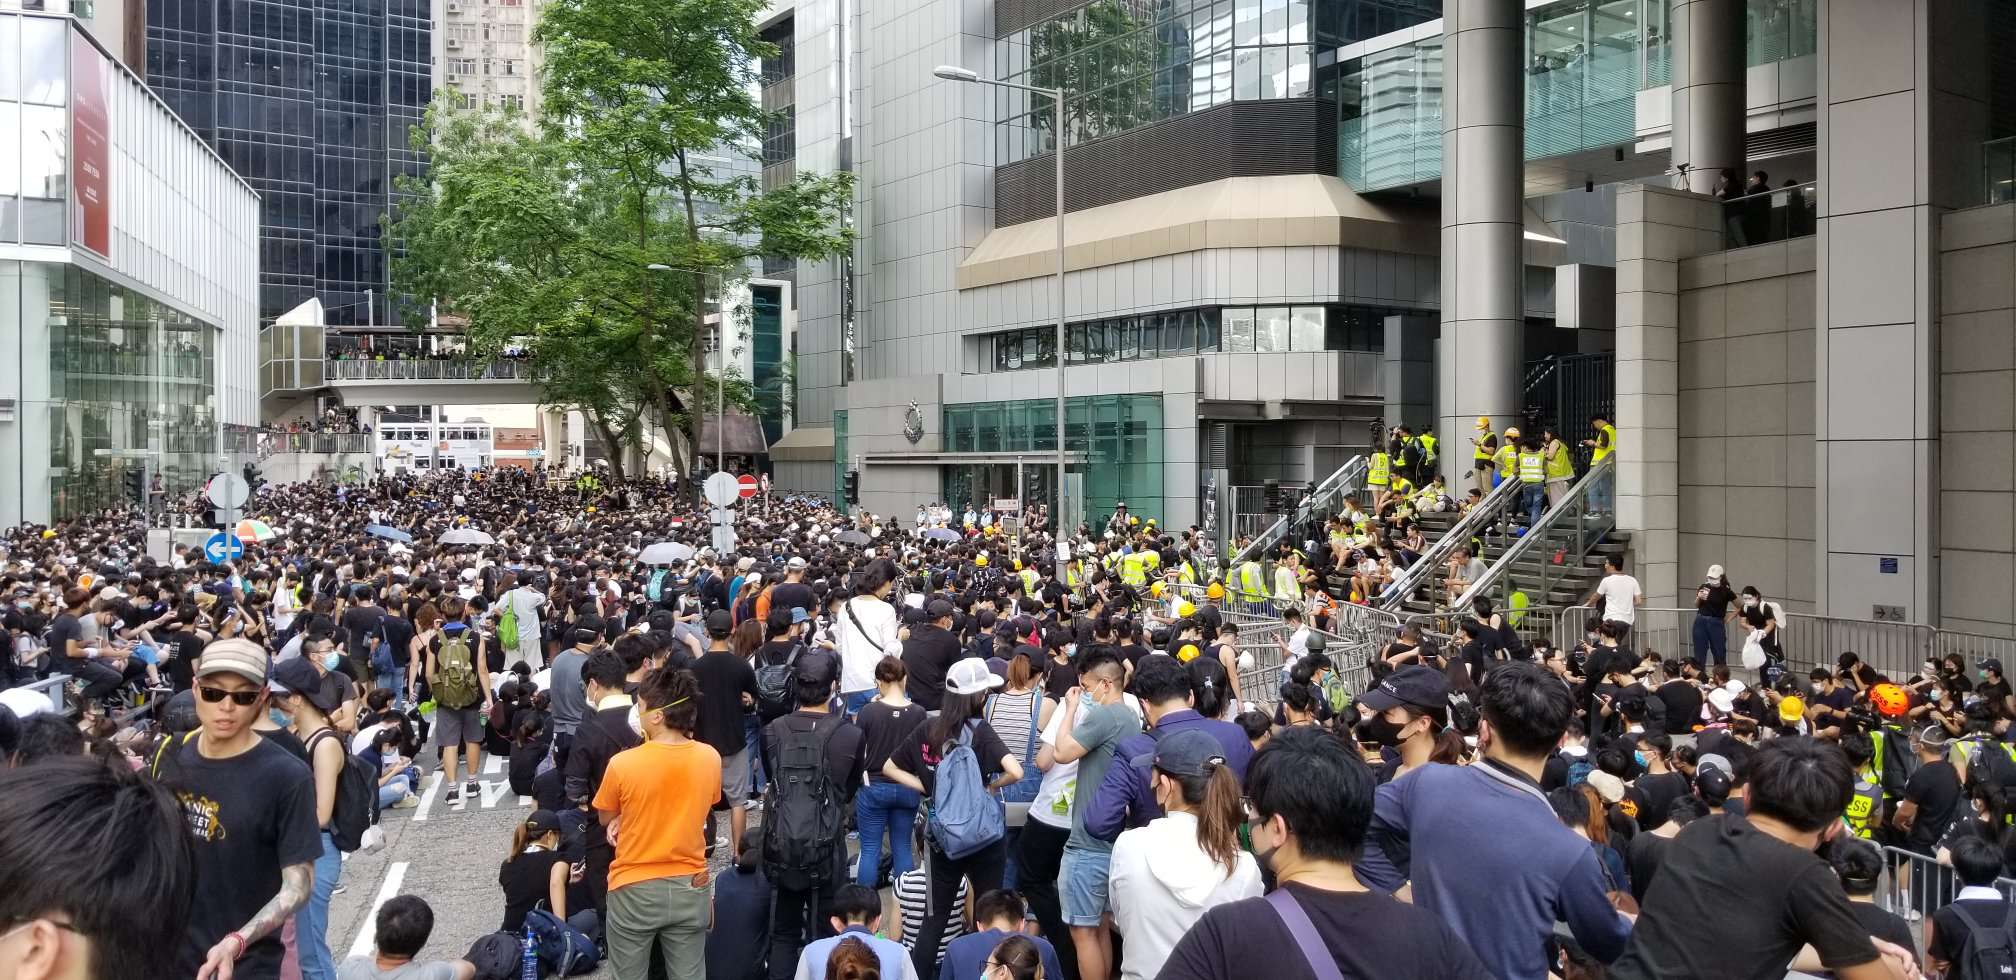 Protesters occupying the area outside police headquarters in Wan Chai. Photo by Vicky Wong.